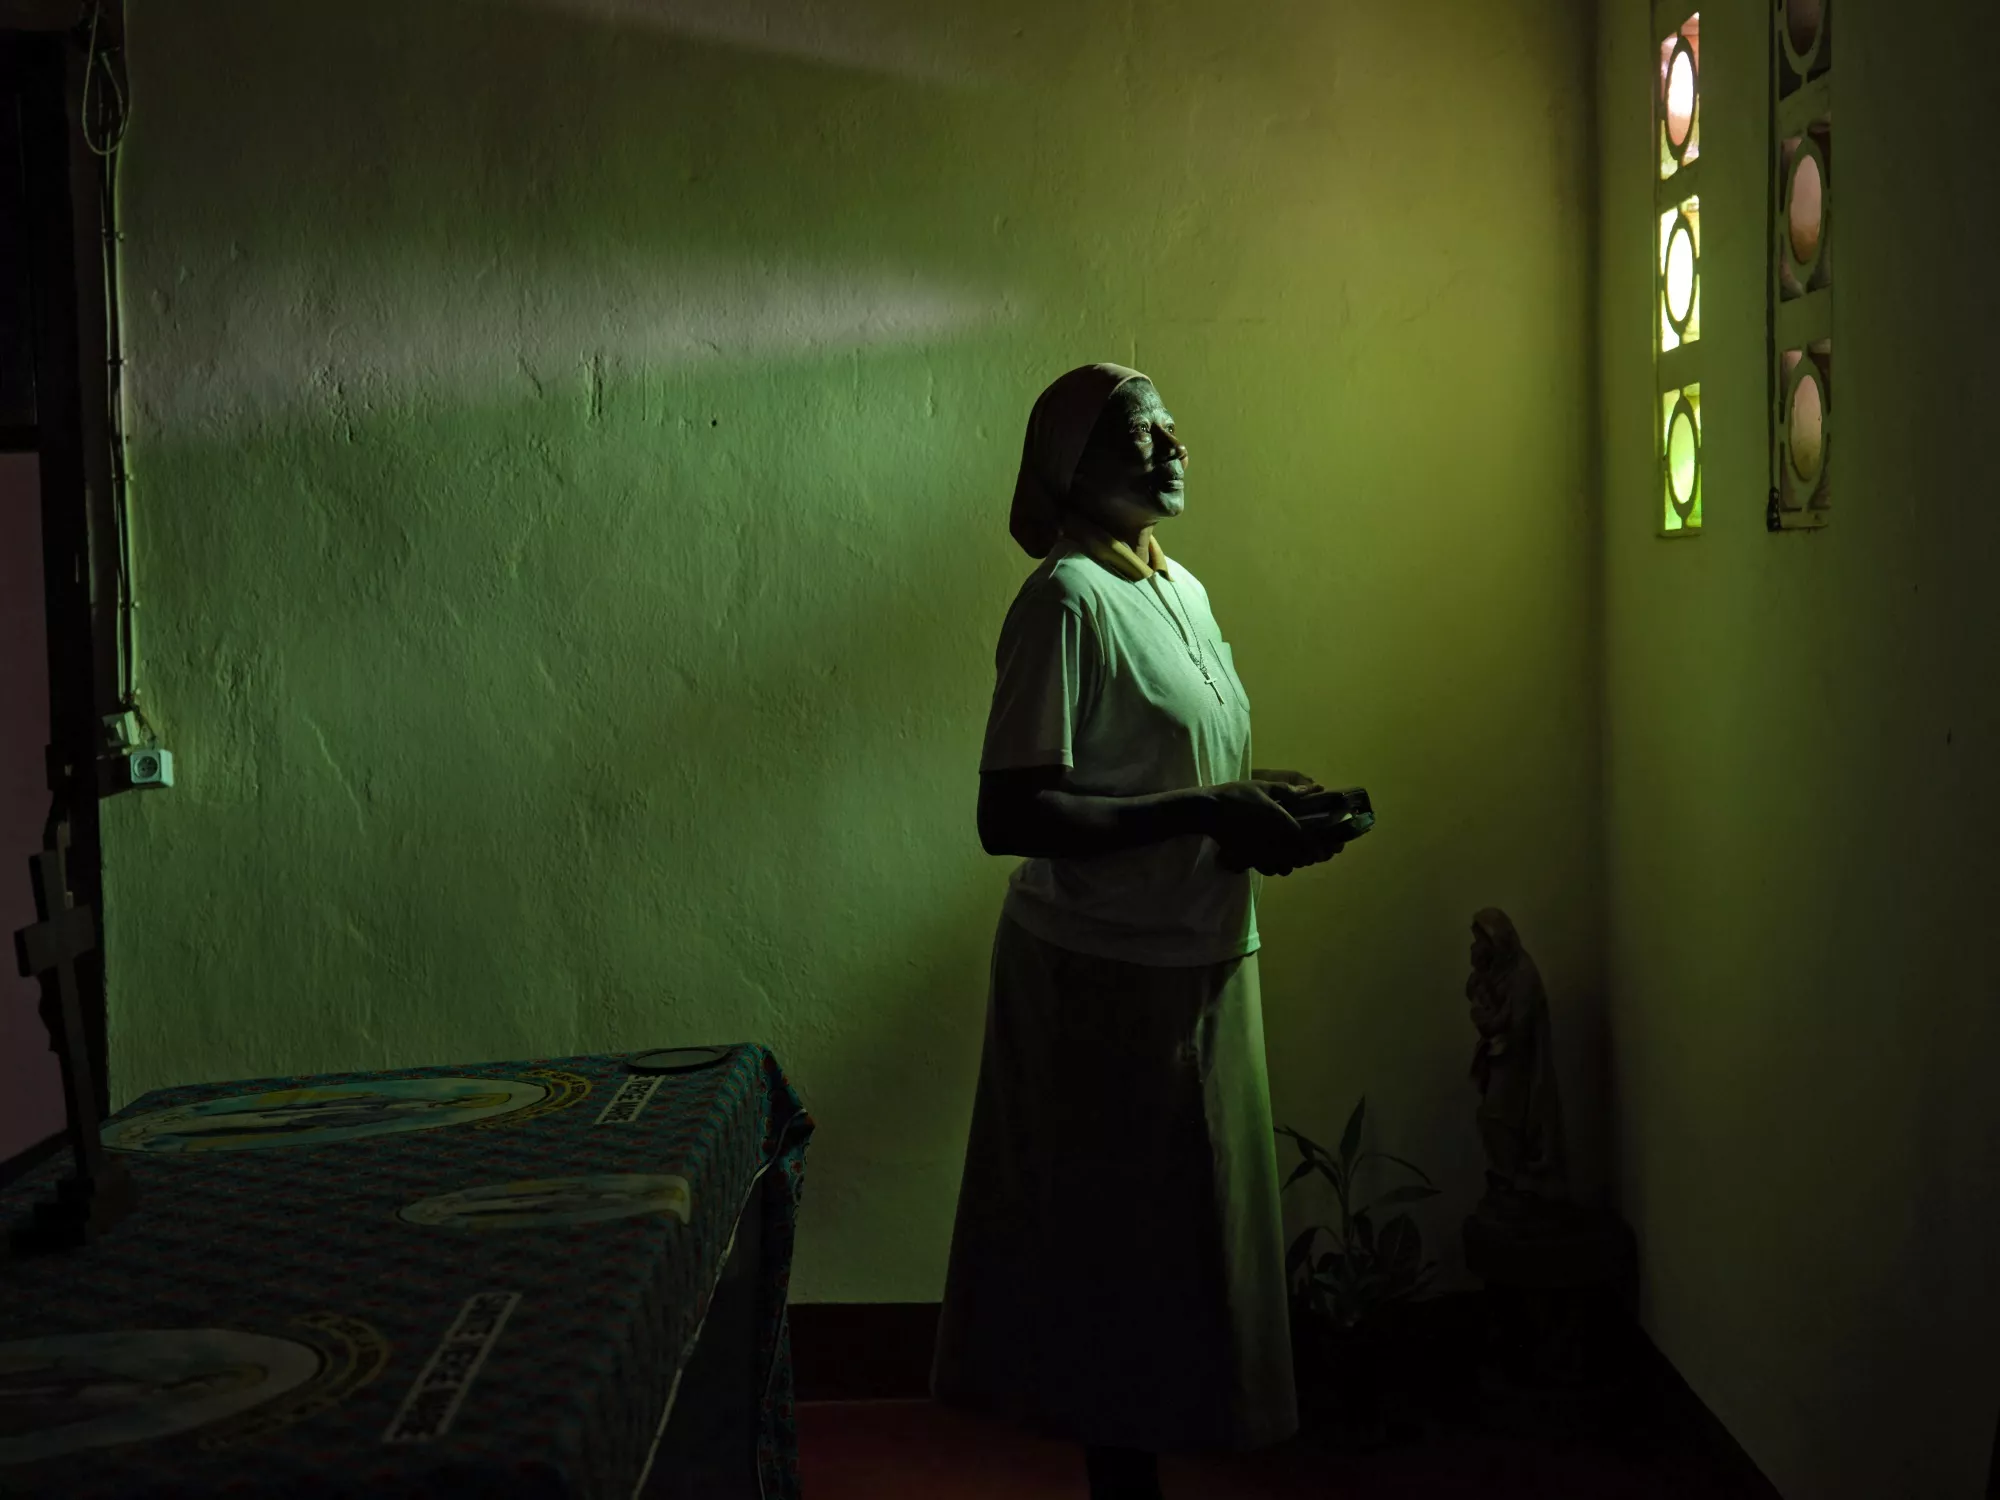 Sister Martine in a prayer room at the mission, where she has spent most of her life.